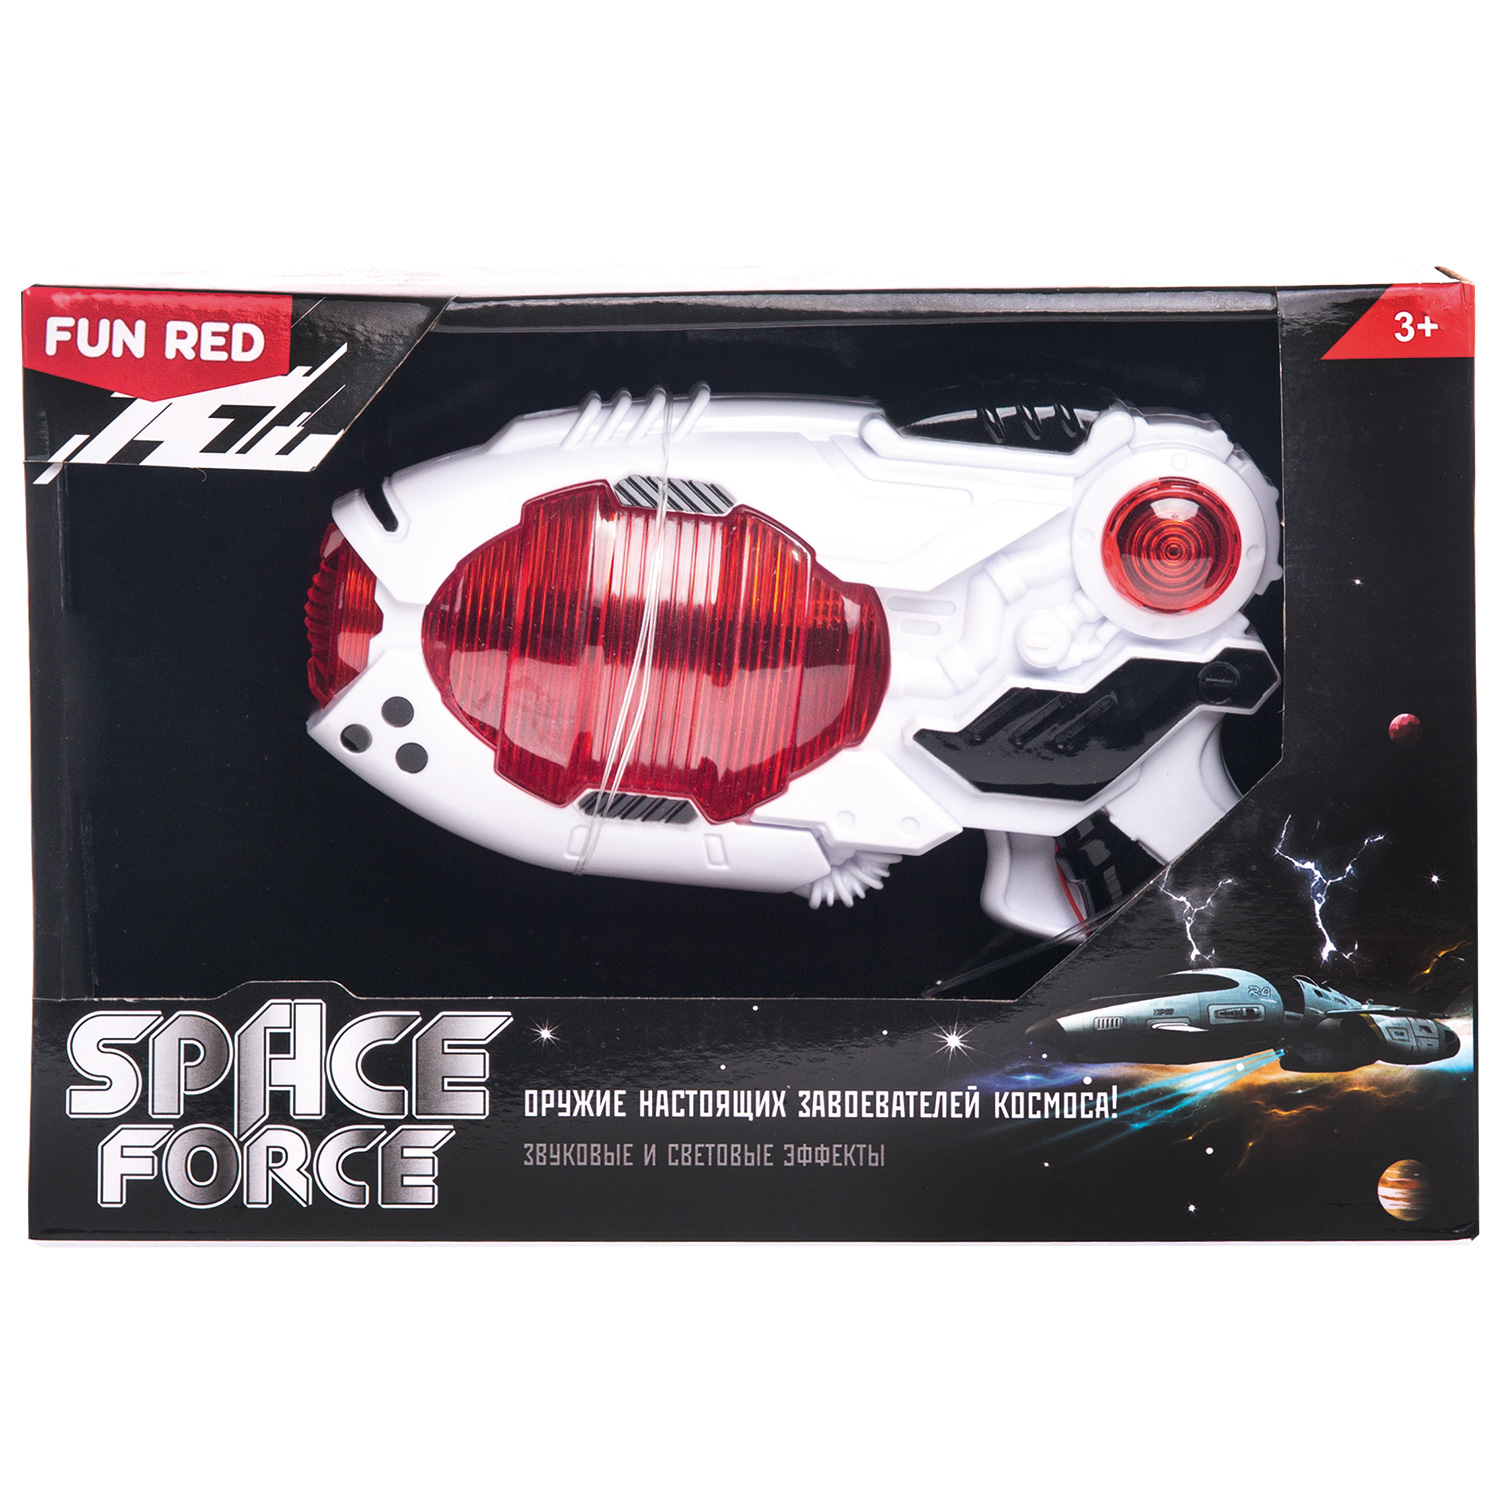 Red fun. Набор fun Red Space Force (frbl009). Fun Red Space Force бластера. Fun Red frbl001. Бластер Gulliver.